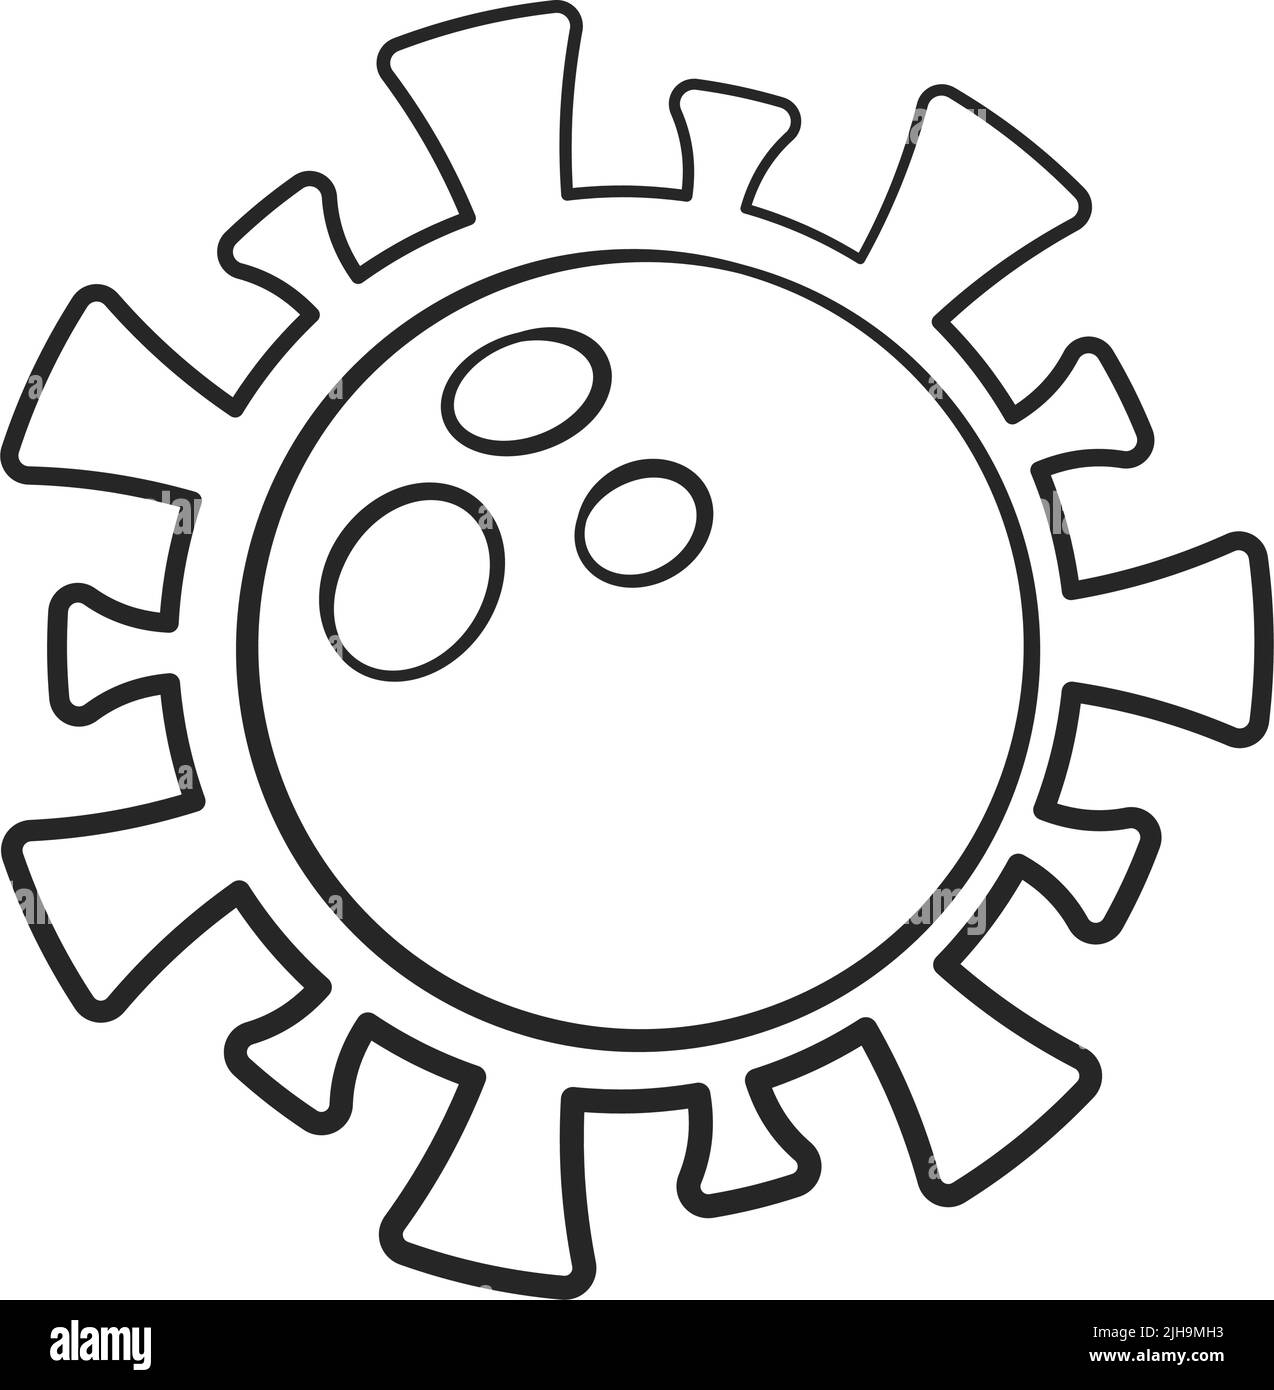 Health risk symbol of a virus or bacteria as a vector line drawing Stock Vector